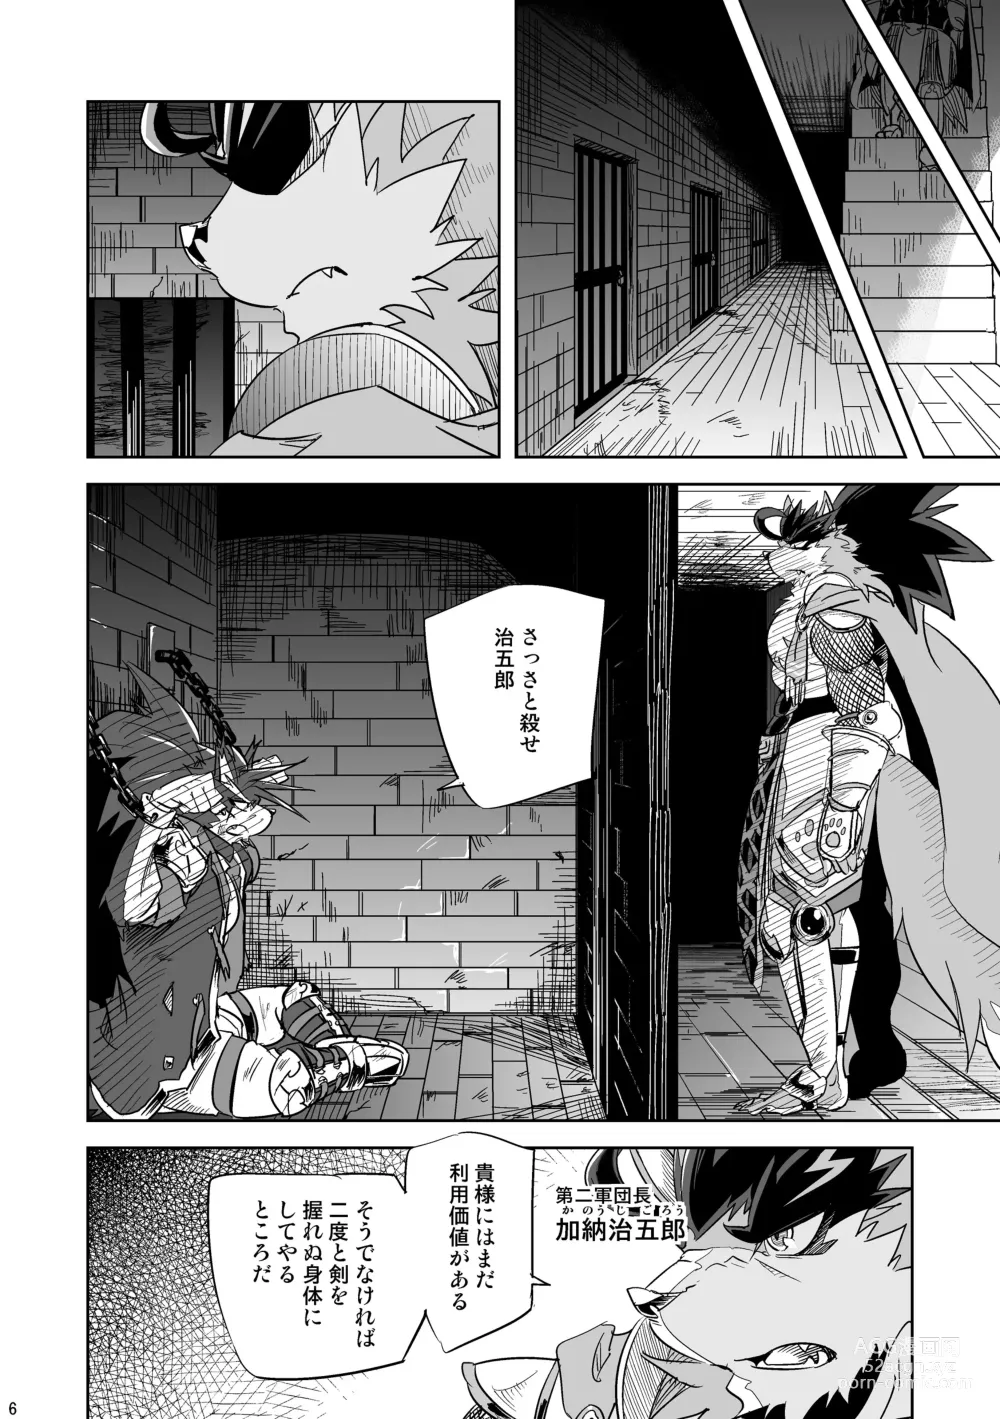 Page 6 of doujinshi Hero in Darkness